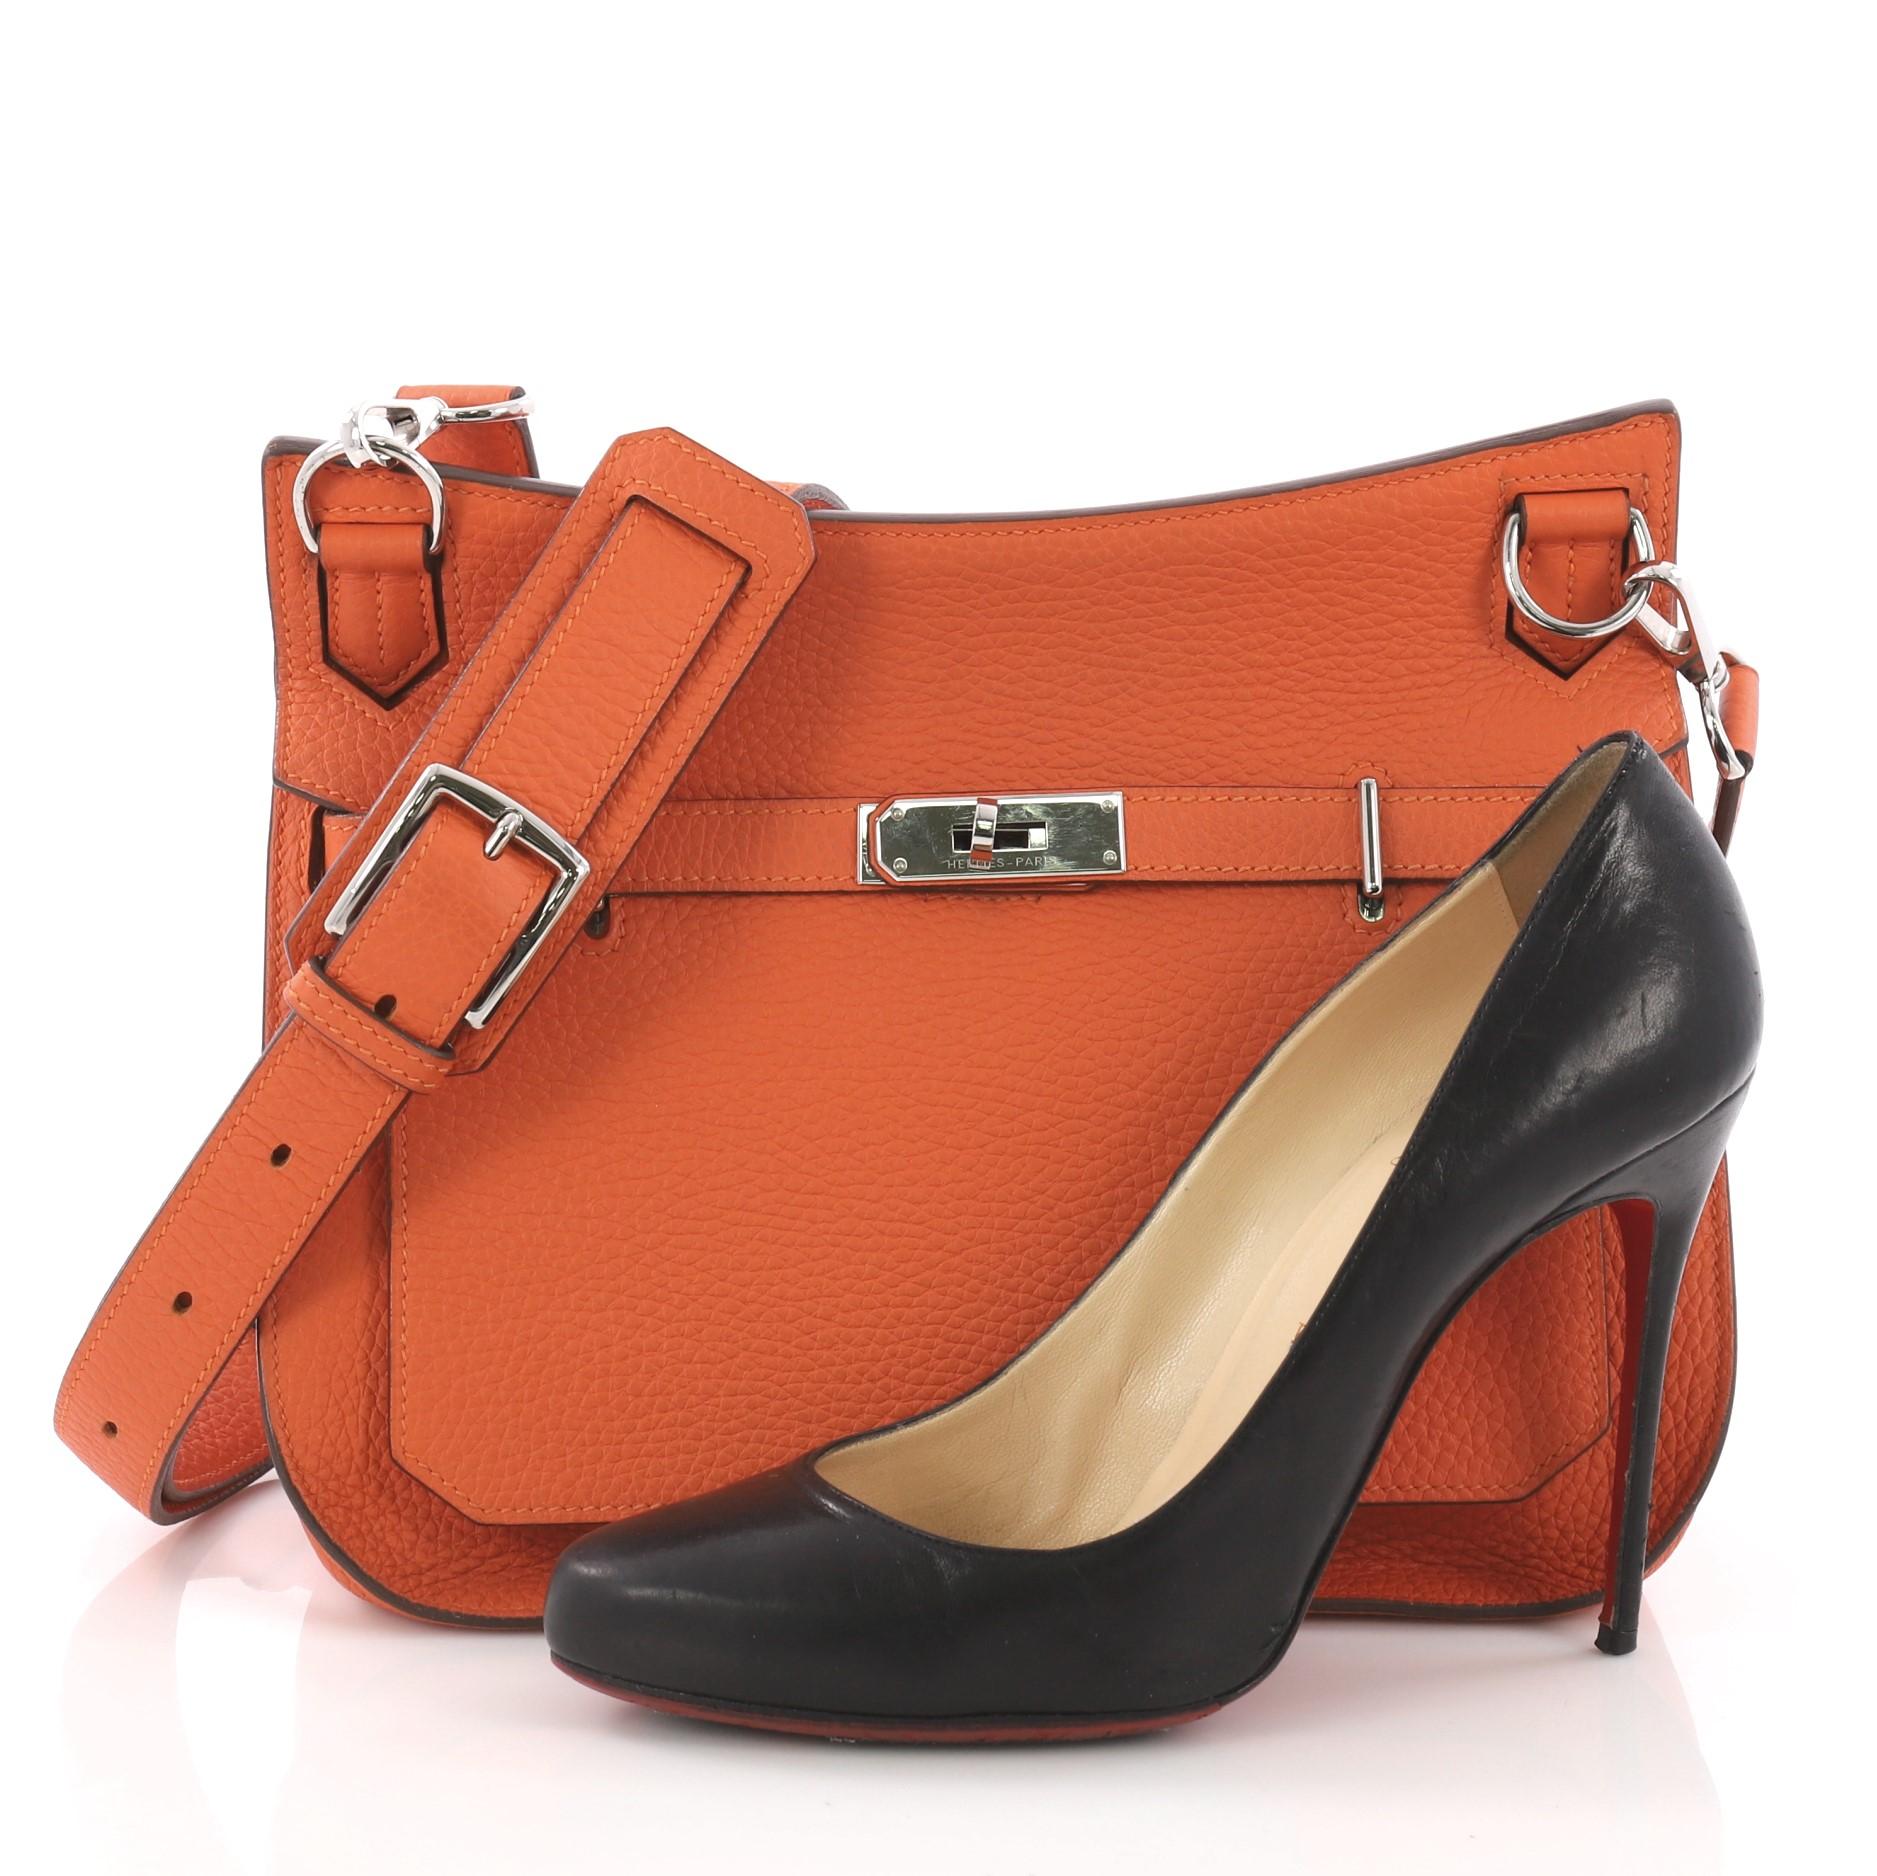 This Hermes Jypsiere Handbag Togo 28, crafted in orange togo leather, features long adjustable strap and palladium-tone hardware. Its turn-lock clasp closure opens to an orange leather interior with slip and zip pockets. Date stamp reads: R Square